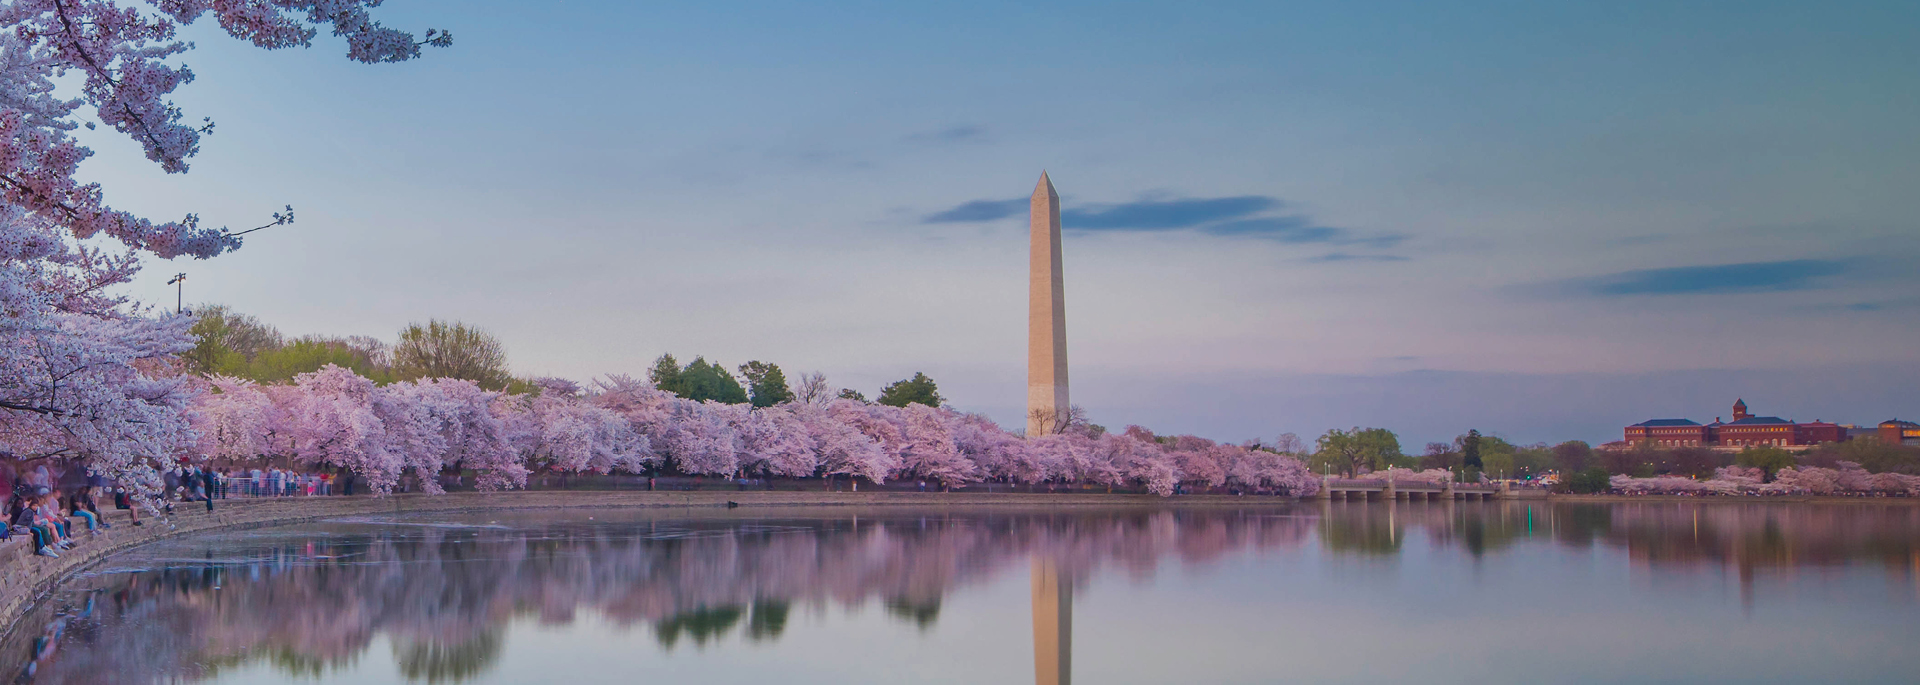 view of lake overlooking washington monument with pink cherry blossom trees in full bloom